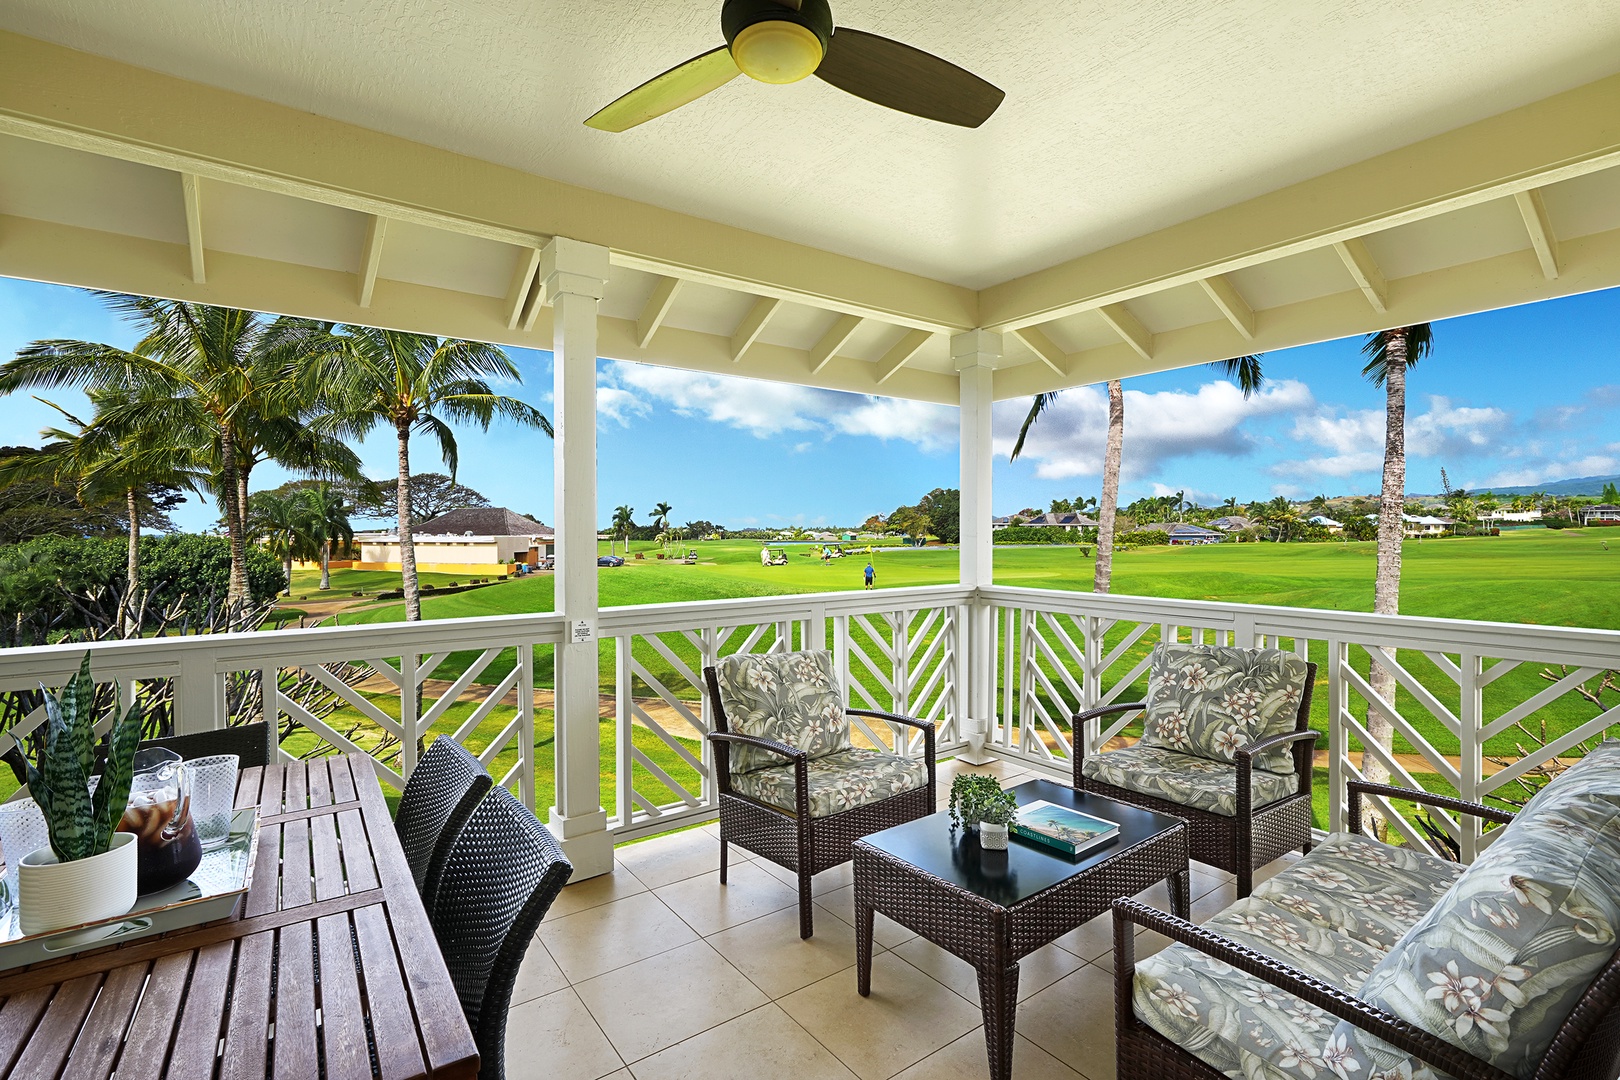 Koloa Vacation Rentals, Pili Mai 11K - Enjoy the private lanai with golf course and distant ocean views